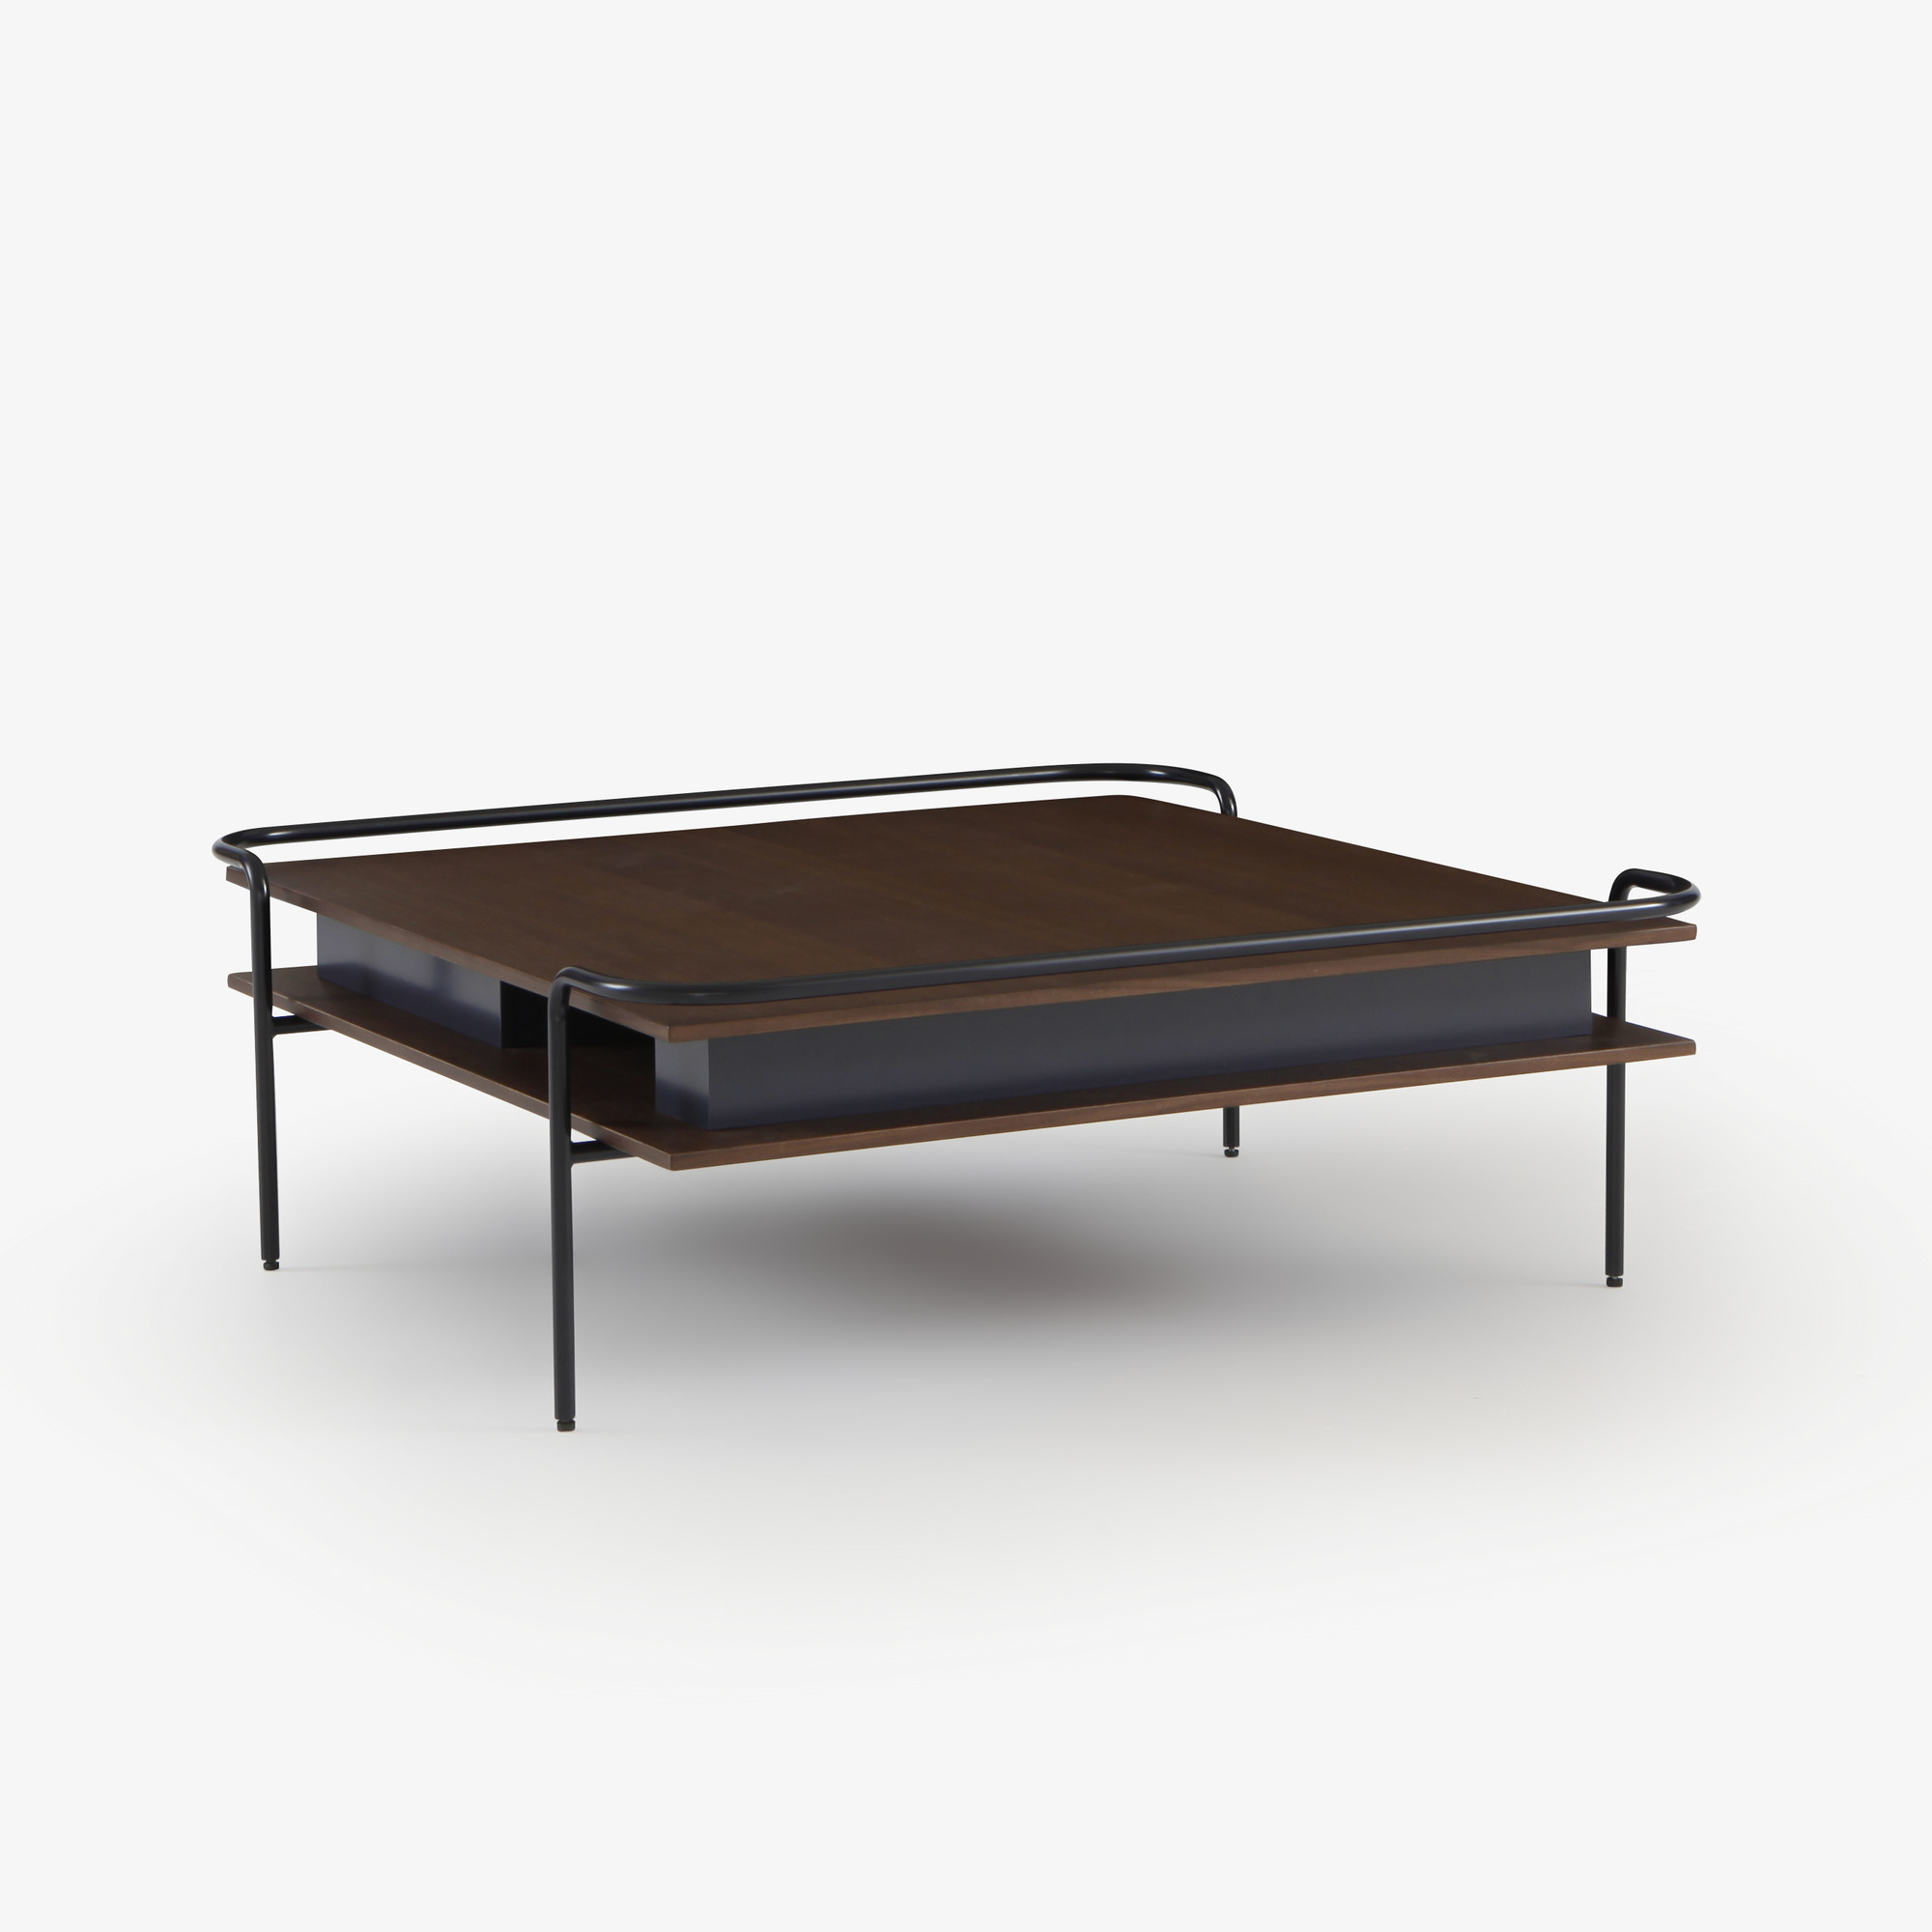 Image Square low table   3